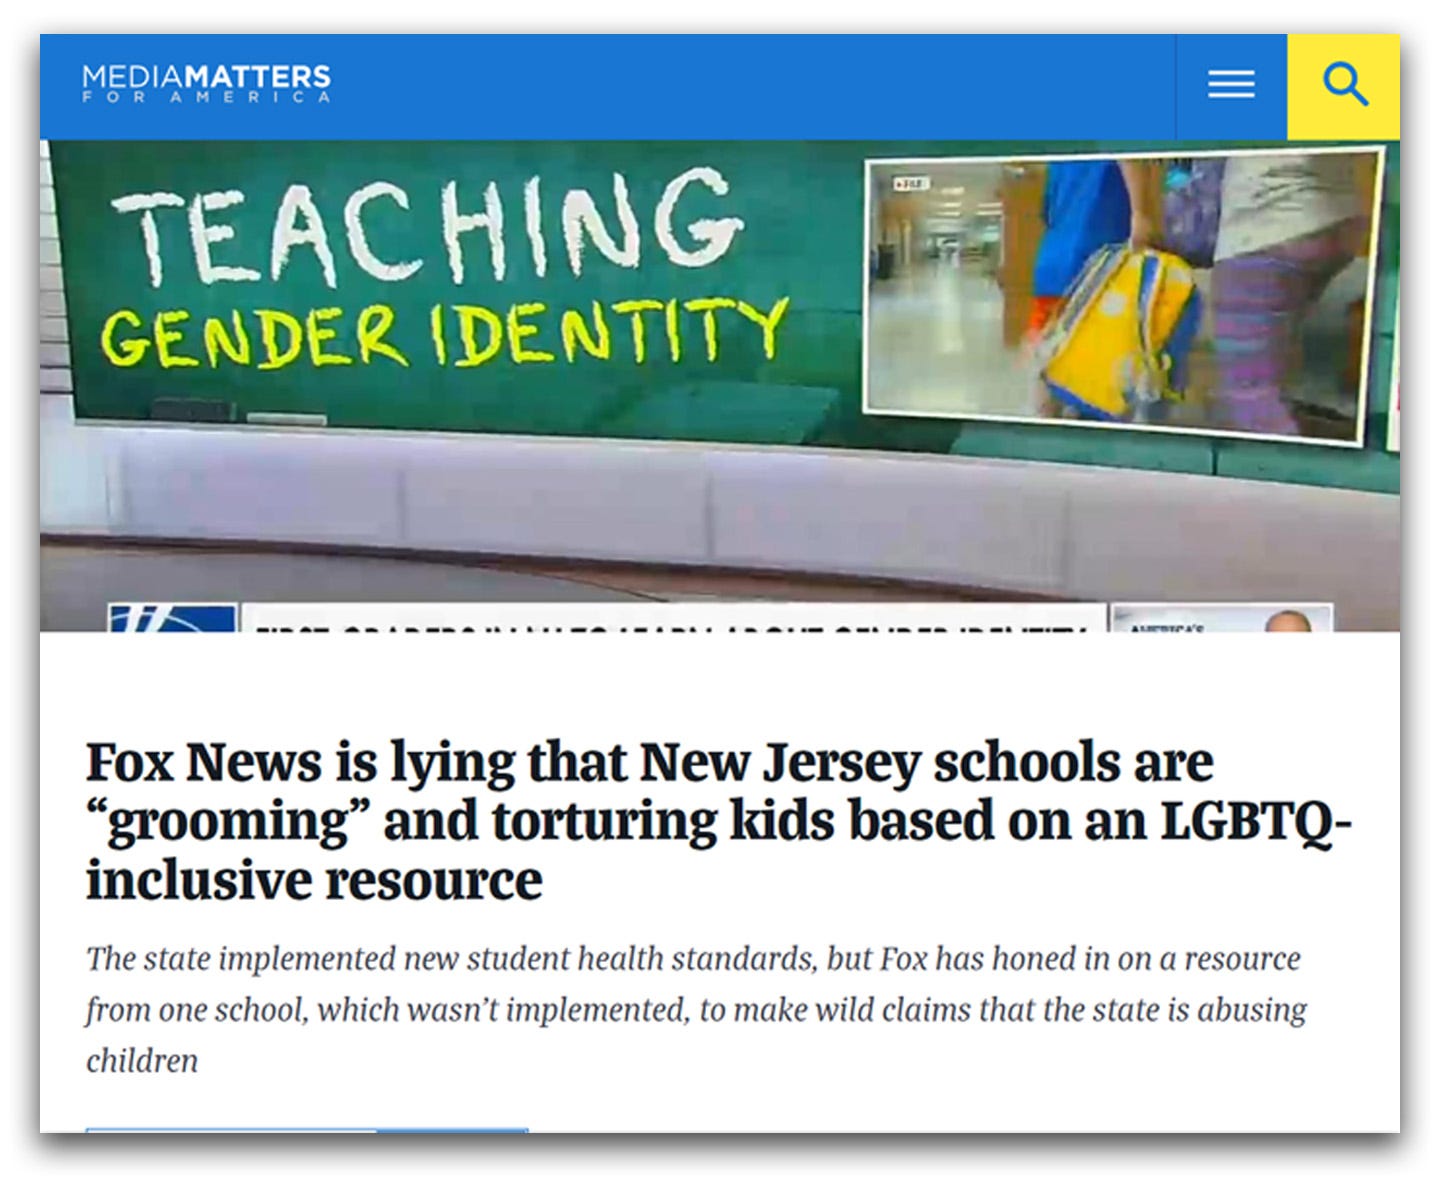 Media Matters headline "Fox News is lying the New Jersey schools are 'grooming' and torturing kids based on an LGBTQ- inclusive resource.